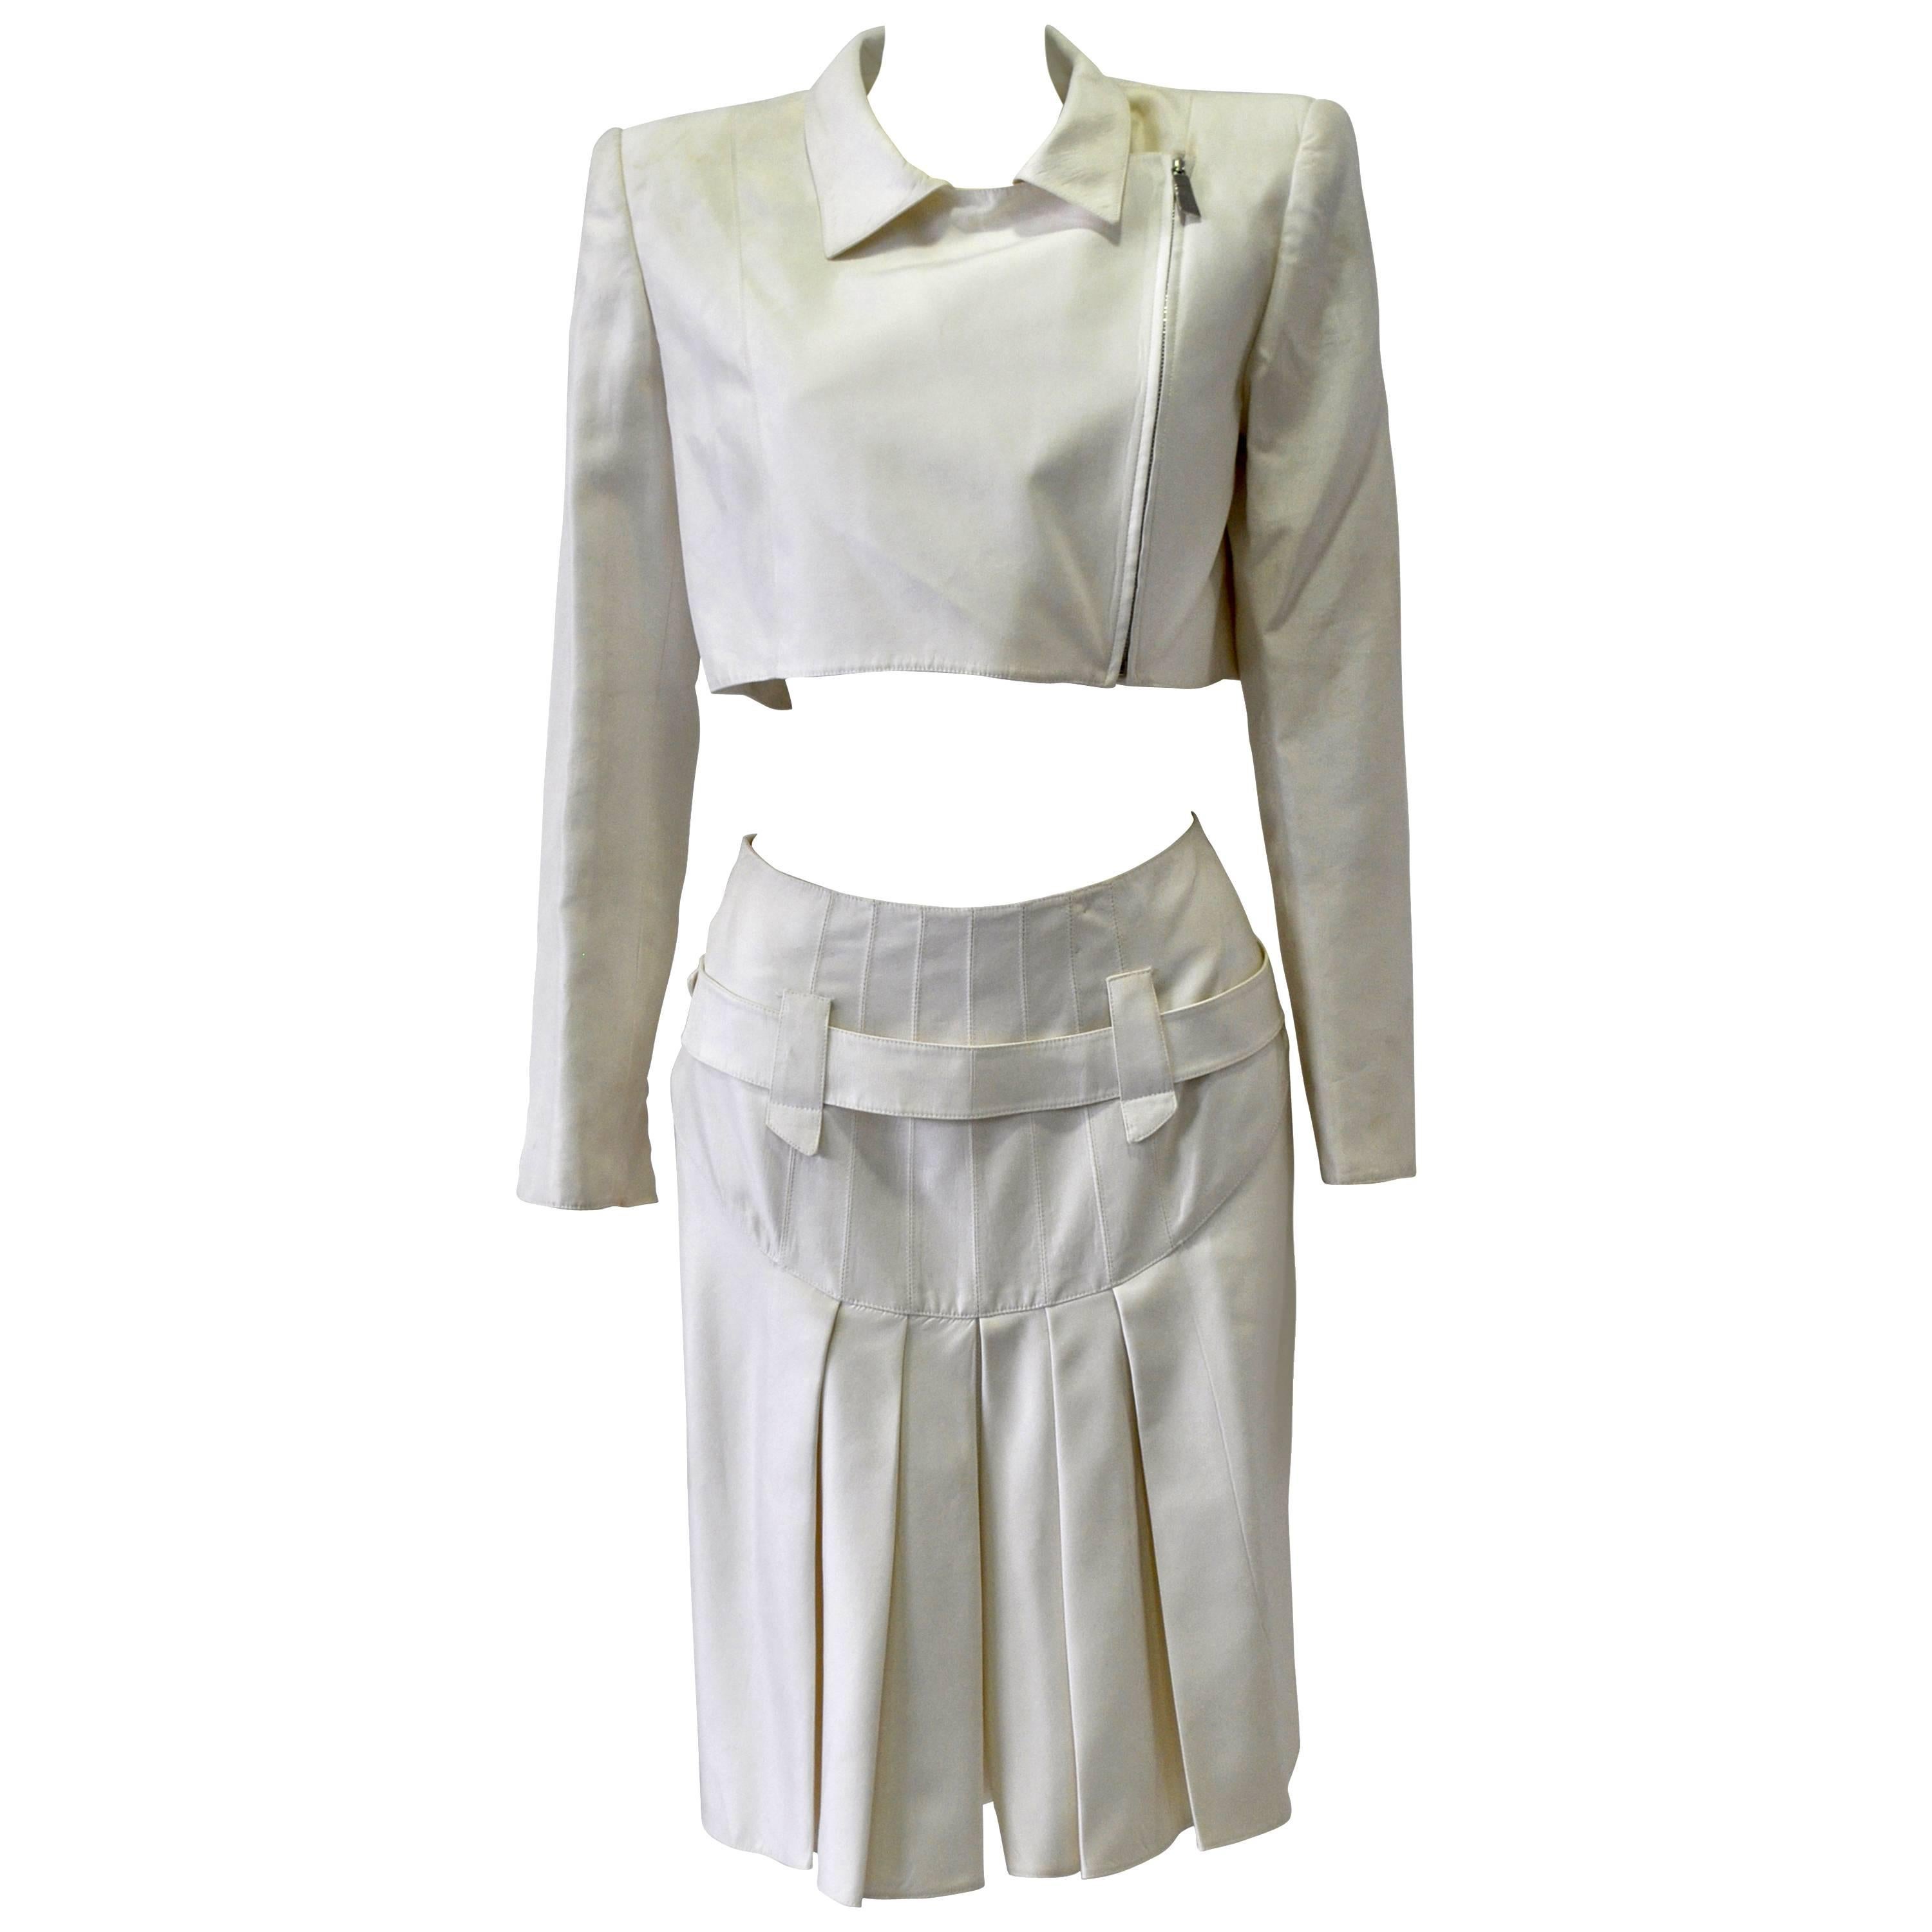 Very Rare Claude Montana Zip Space Age Inspired Skirt Suit For Sale